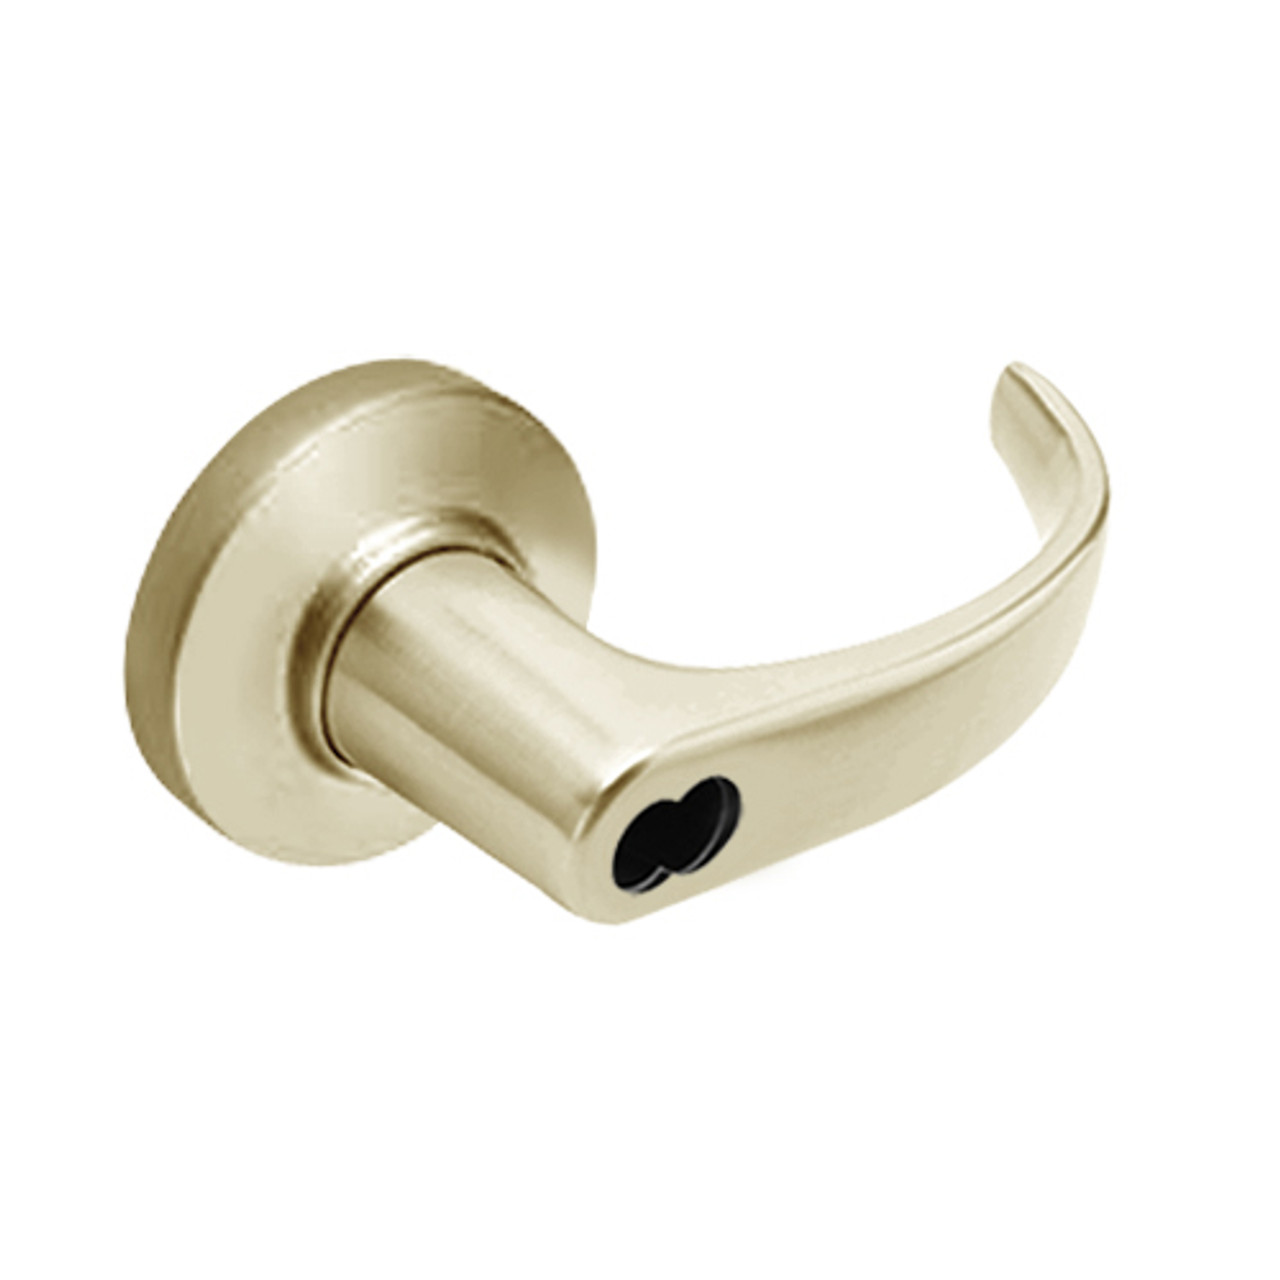 9K37DR14CSTK606 Best 9K Series Special Function Cylindrical Lever Locks with Curved with Return Lever Design Accept 7 Pin Best Core in Satin Brass